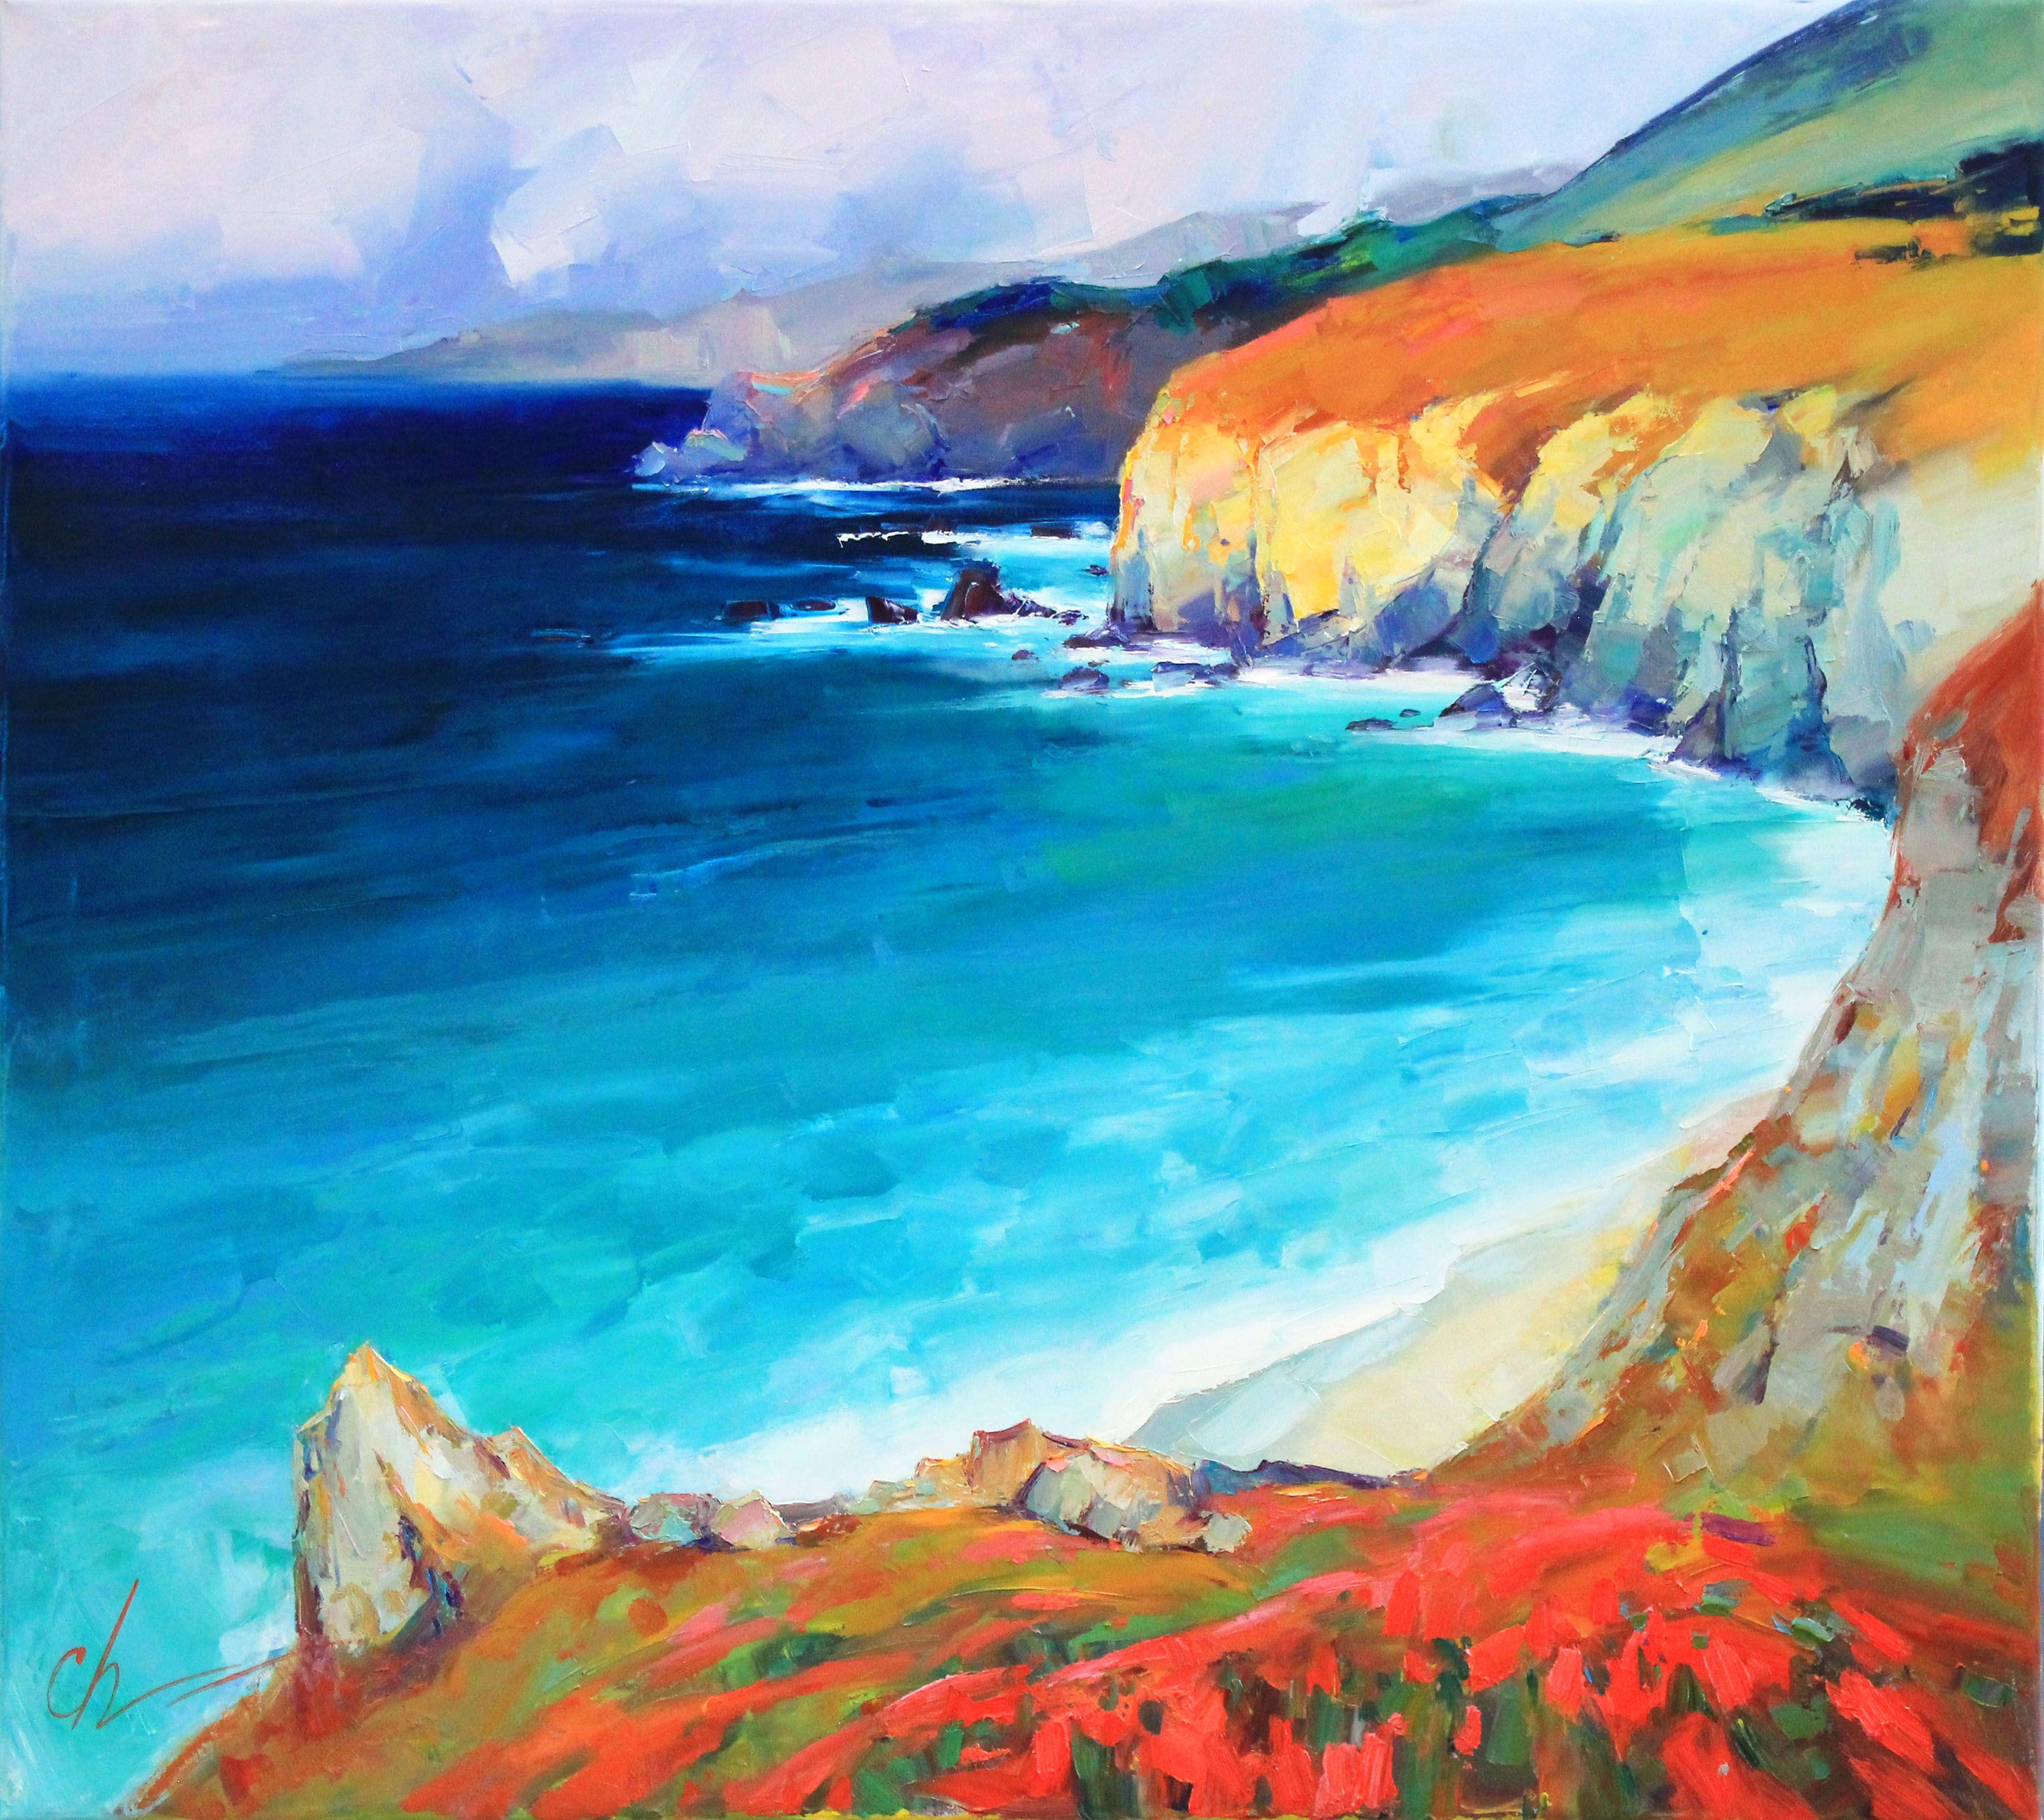 The Original oil painting is an example of ocean art, showcasing the beauty and power of the sea. It was created using the technique of oil painting, which allows the artist to use vivid colors and create texture on the canvas. The impasto painting